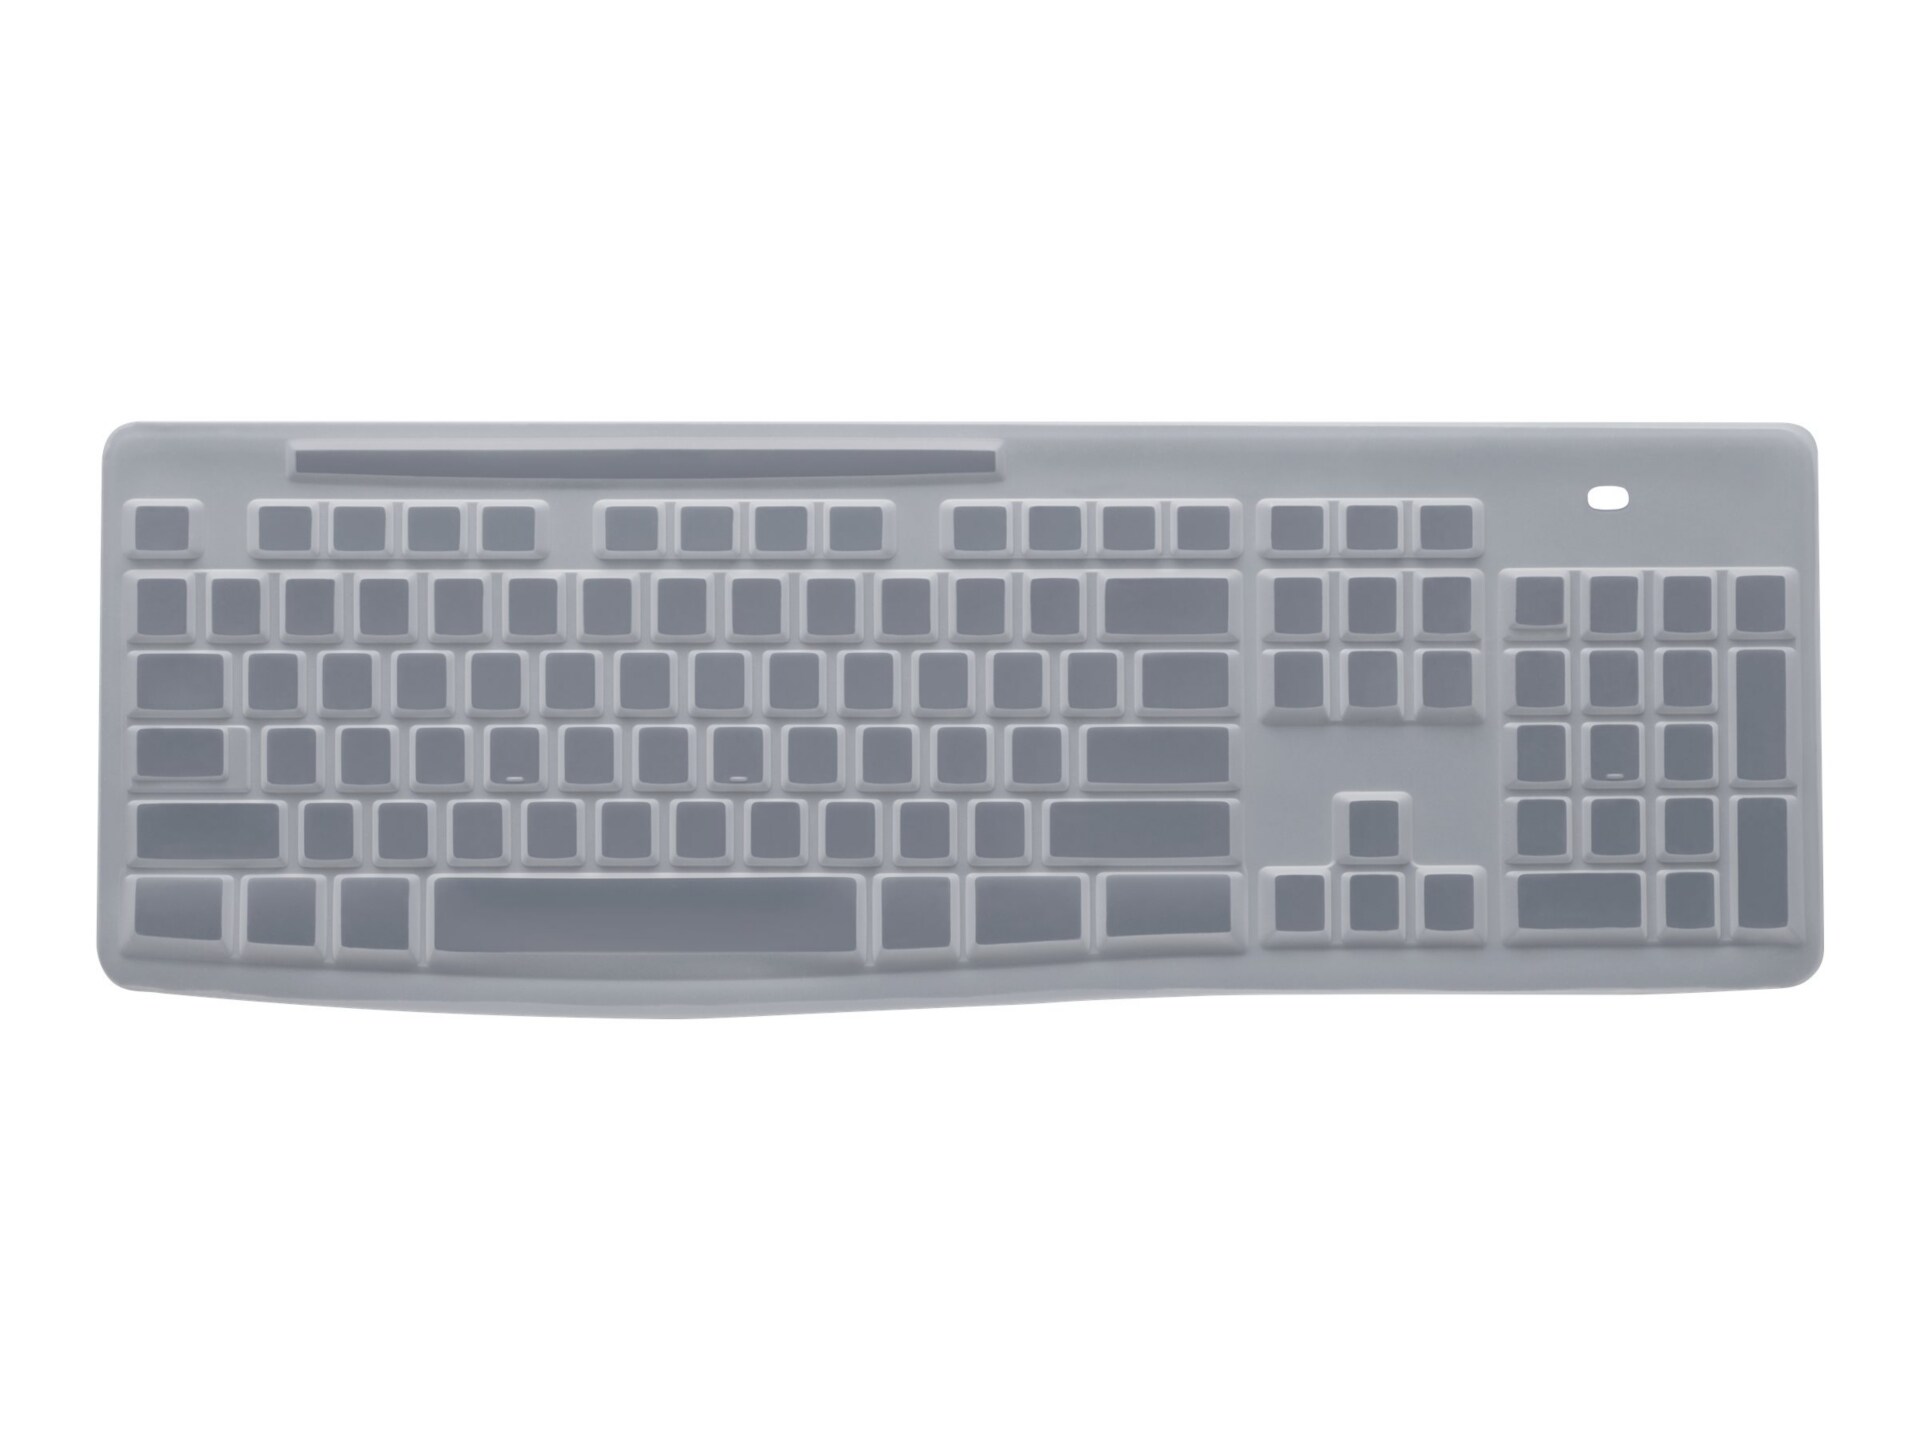 Logitech Protective Cover for K270 Education - keyboard cover - 956-000017 Office - CDW.com